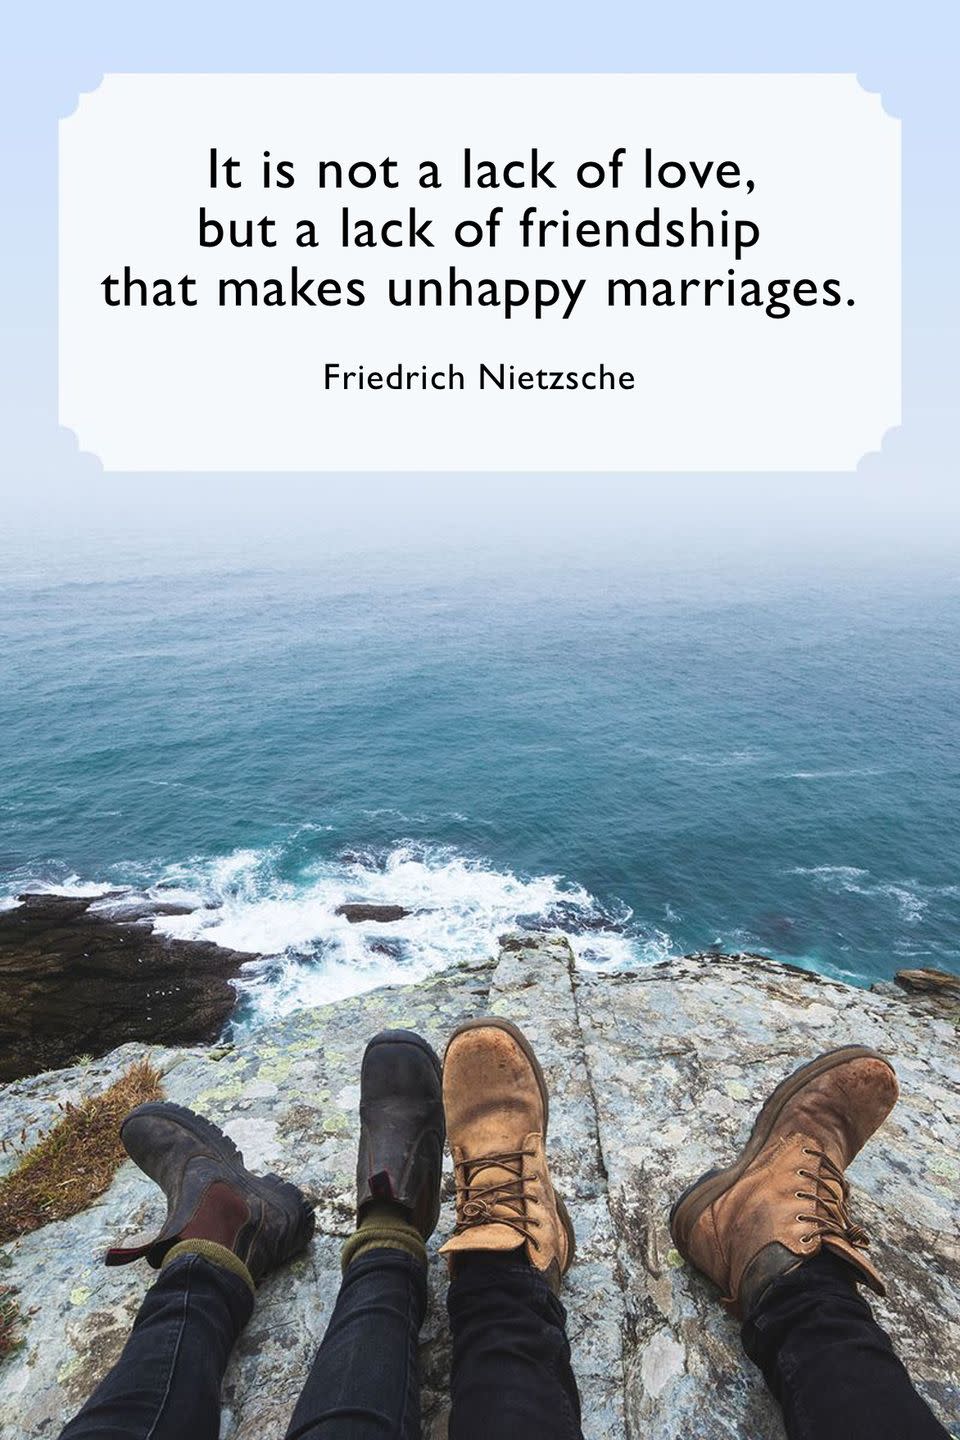 <p>"It is not a lack of love, but a lack of friendship that makes unhappy marriages."</p>